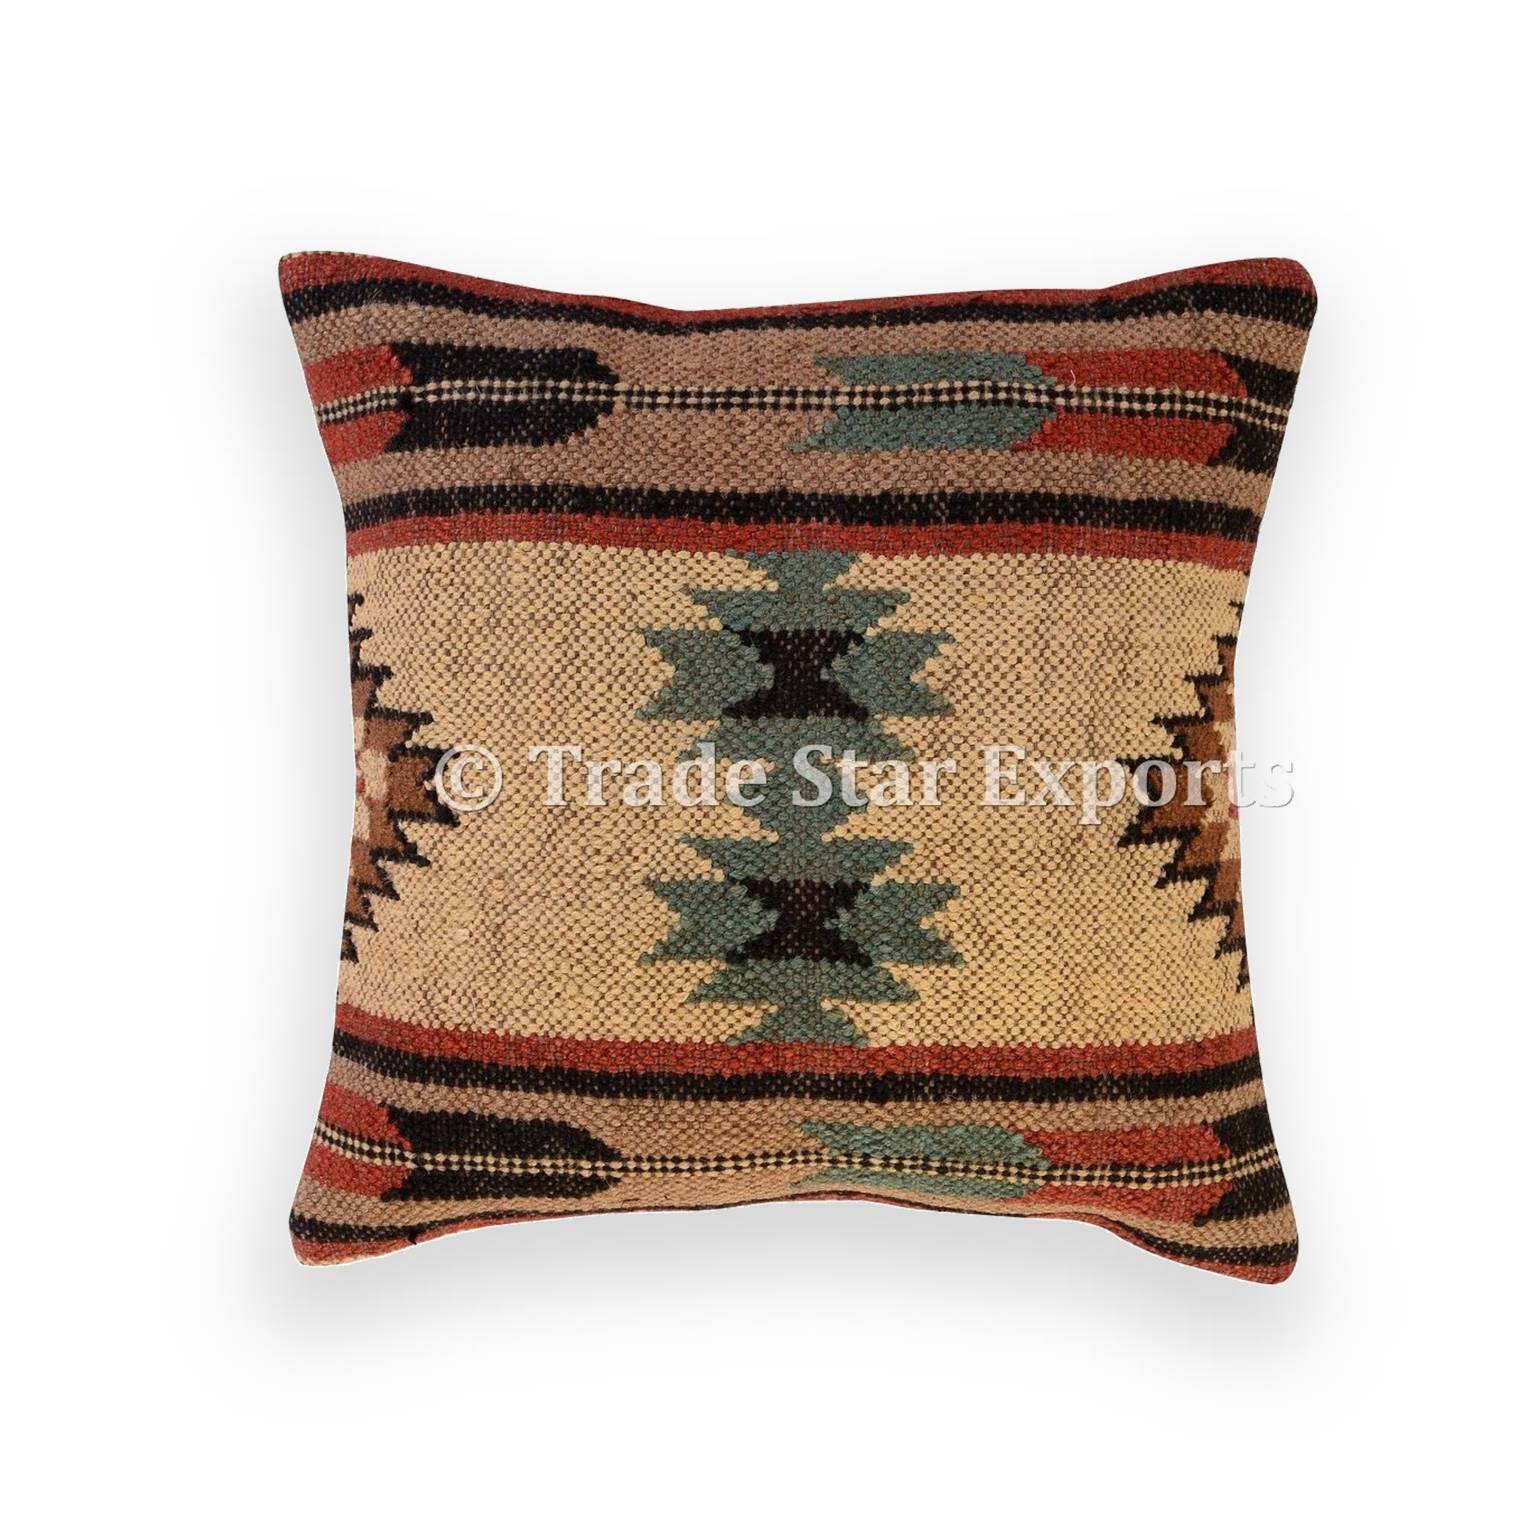 Indian Handwoven Kilim Jute Cushion Cover 18x18 Vintage Rug Rustic Pillow Cases 